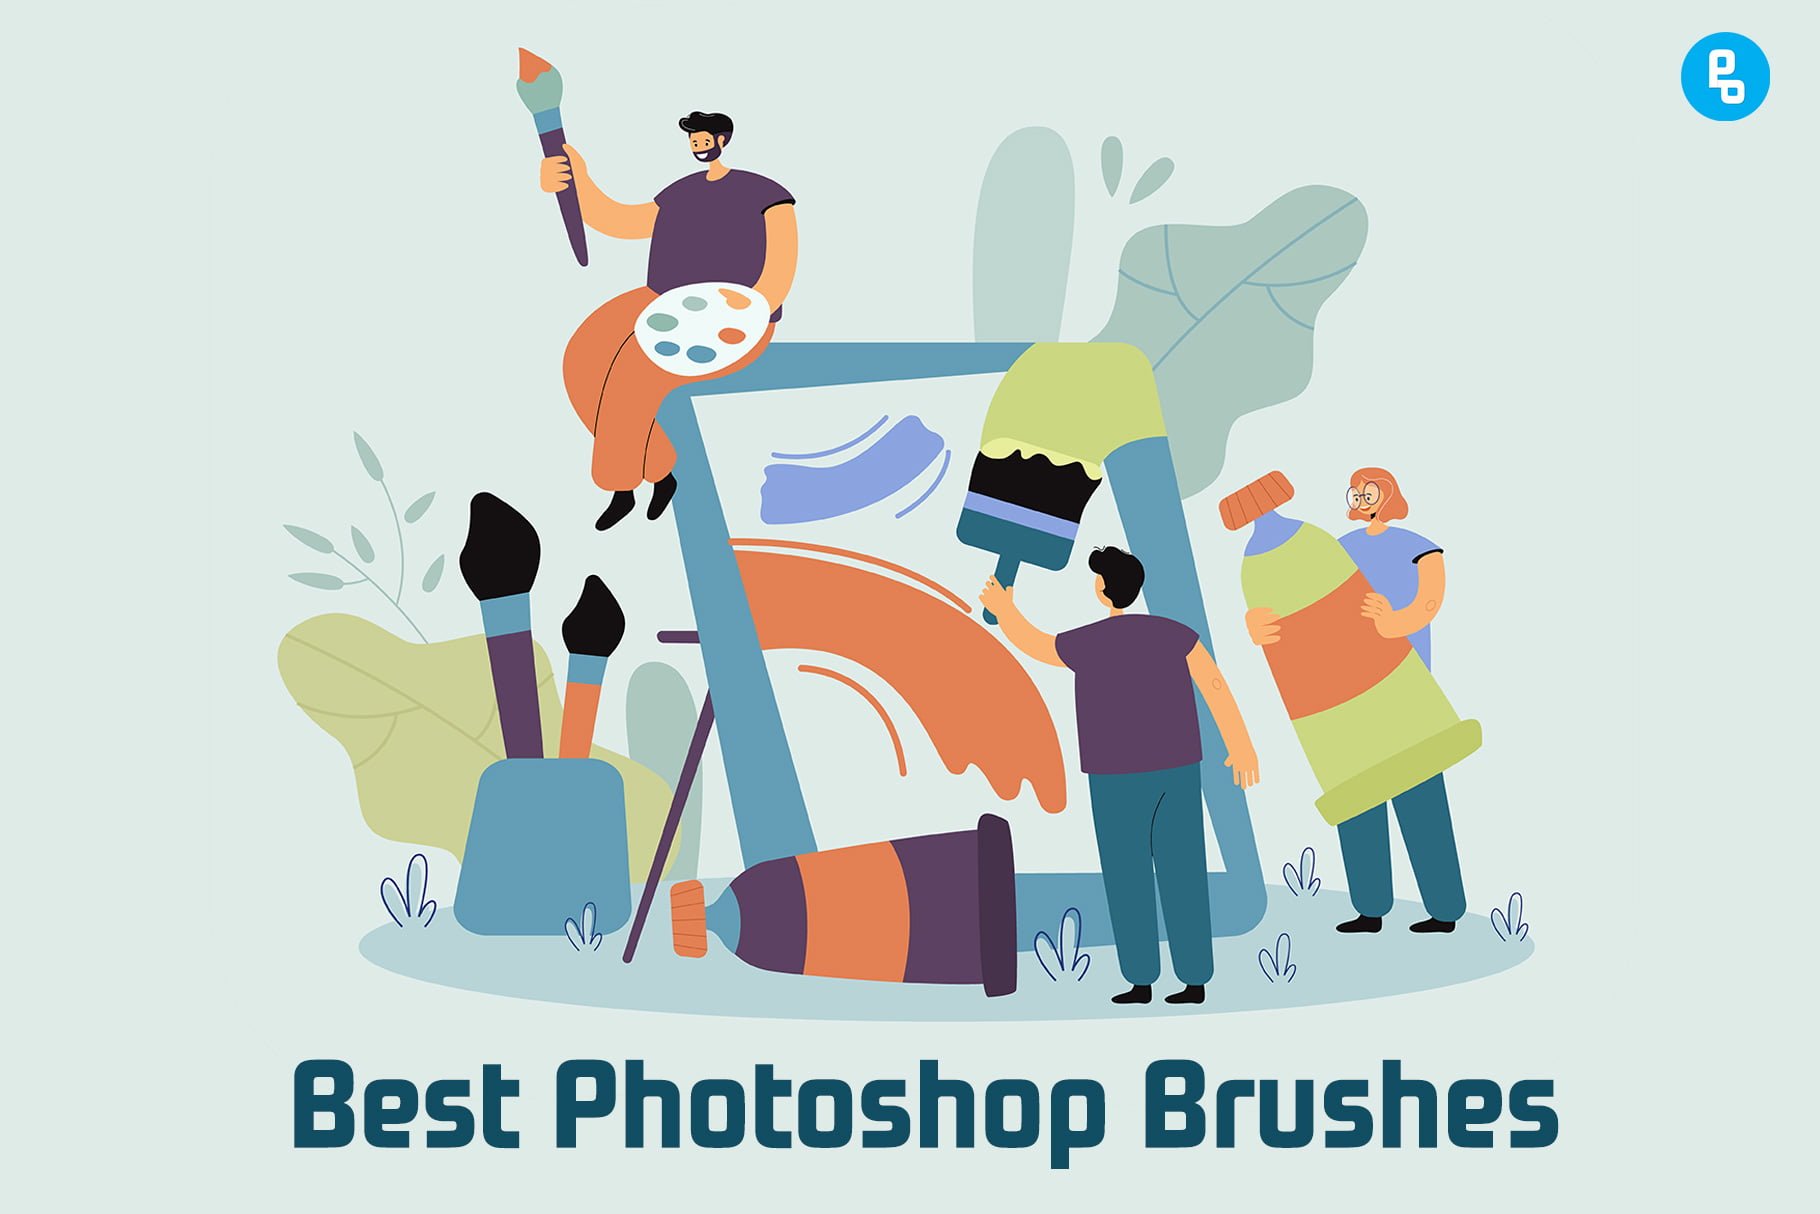 Do you want to see those same tools used to create jaw-dropping signs, flyers, posters, and maybe even business cards for a local pizzeria or dentist's office? If so, then these design brushes are for you!